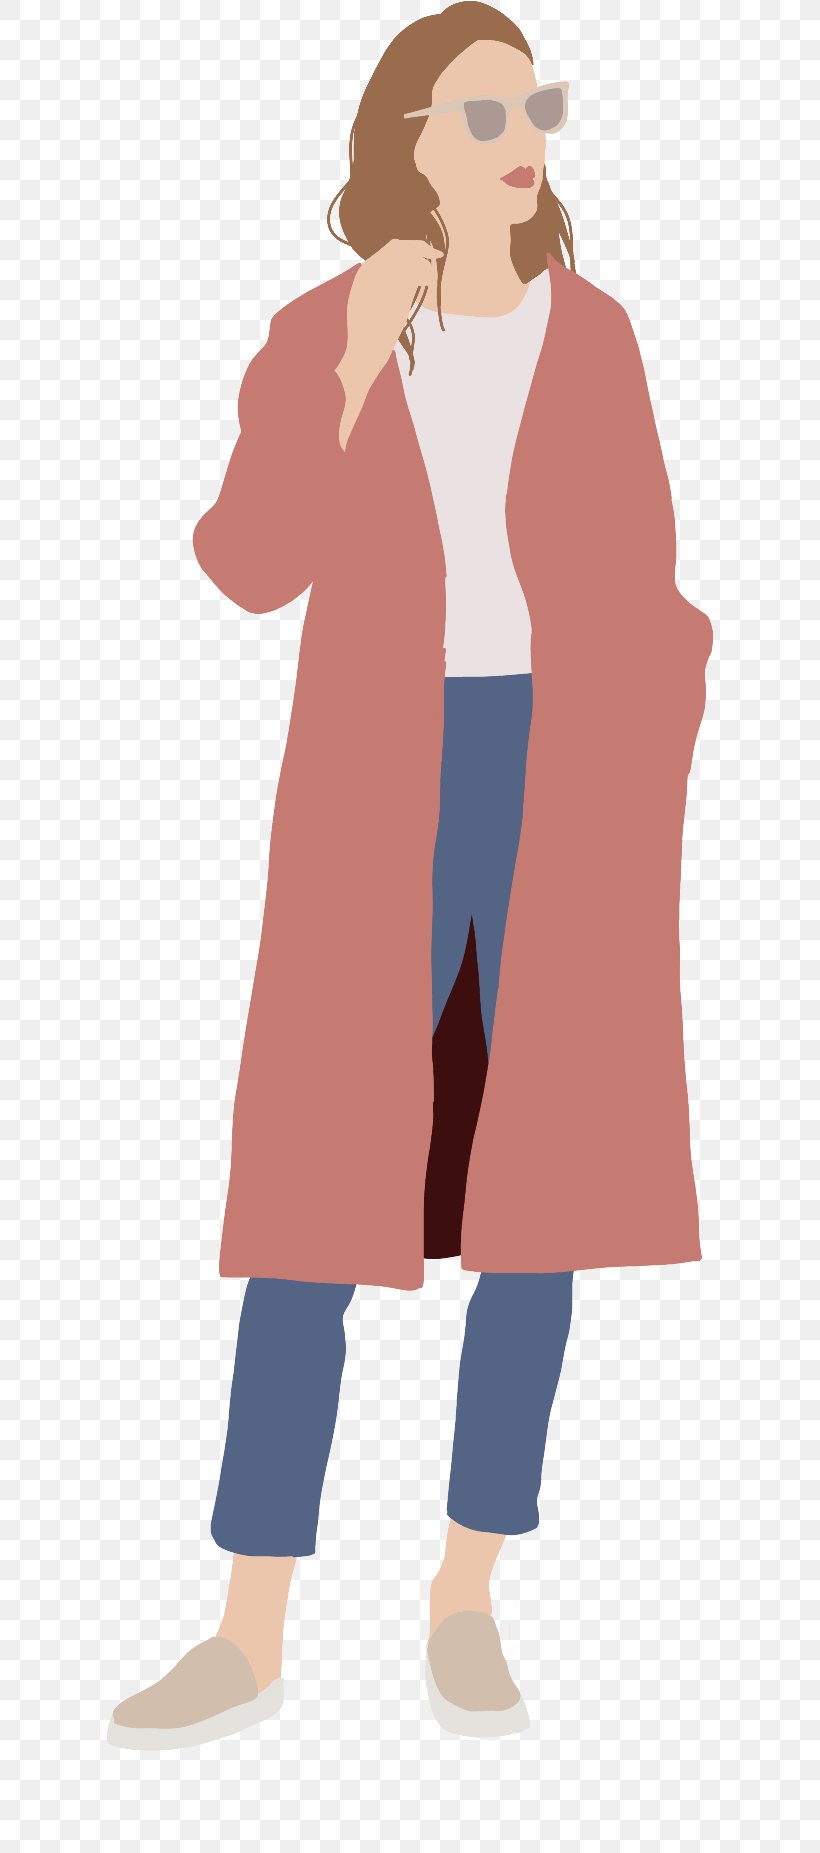 Person Cartoon, PNG, 607x1853px, Architecture, Clothing, Collage, Fur ...